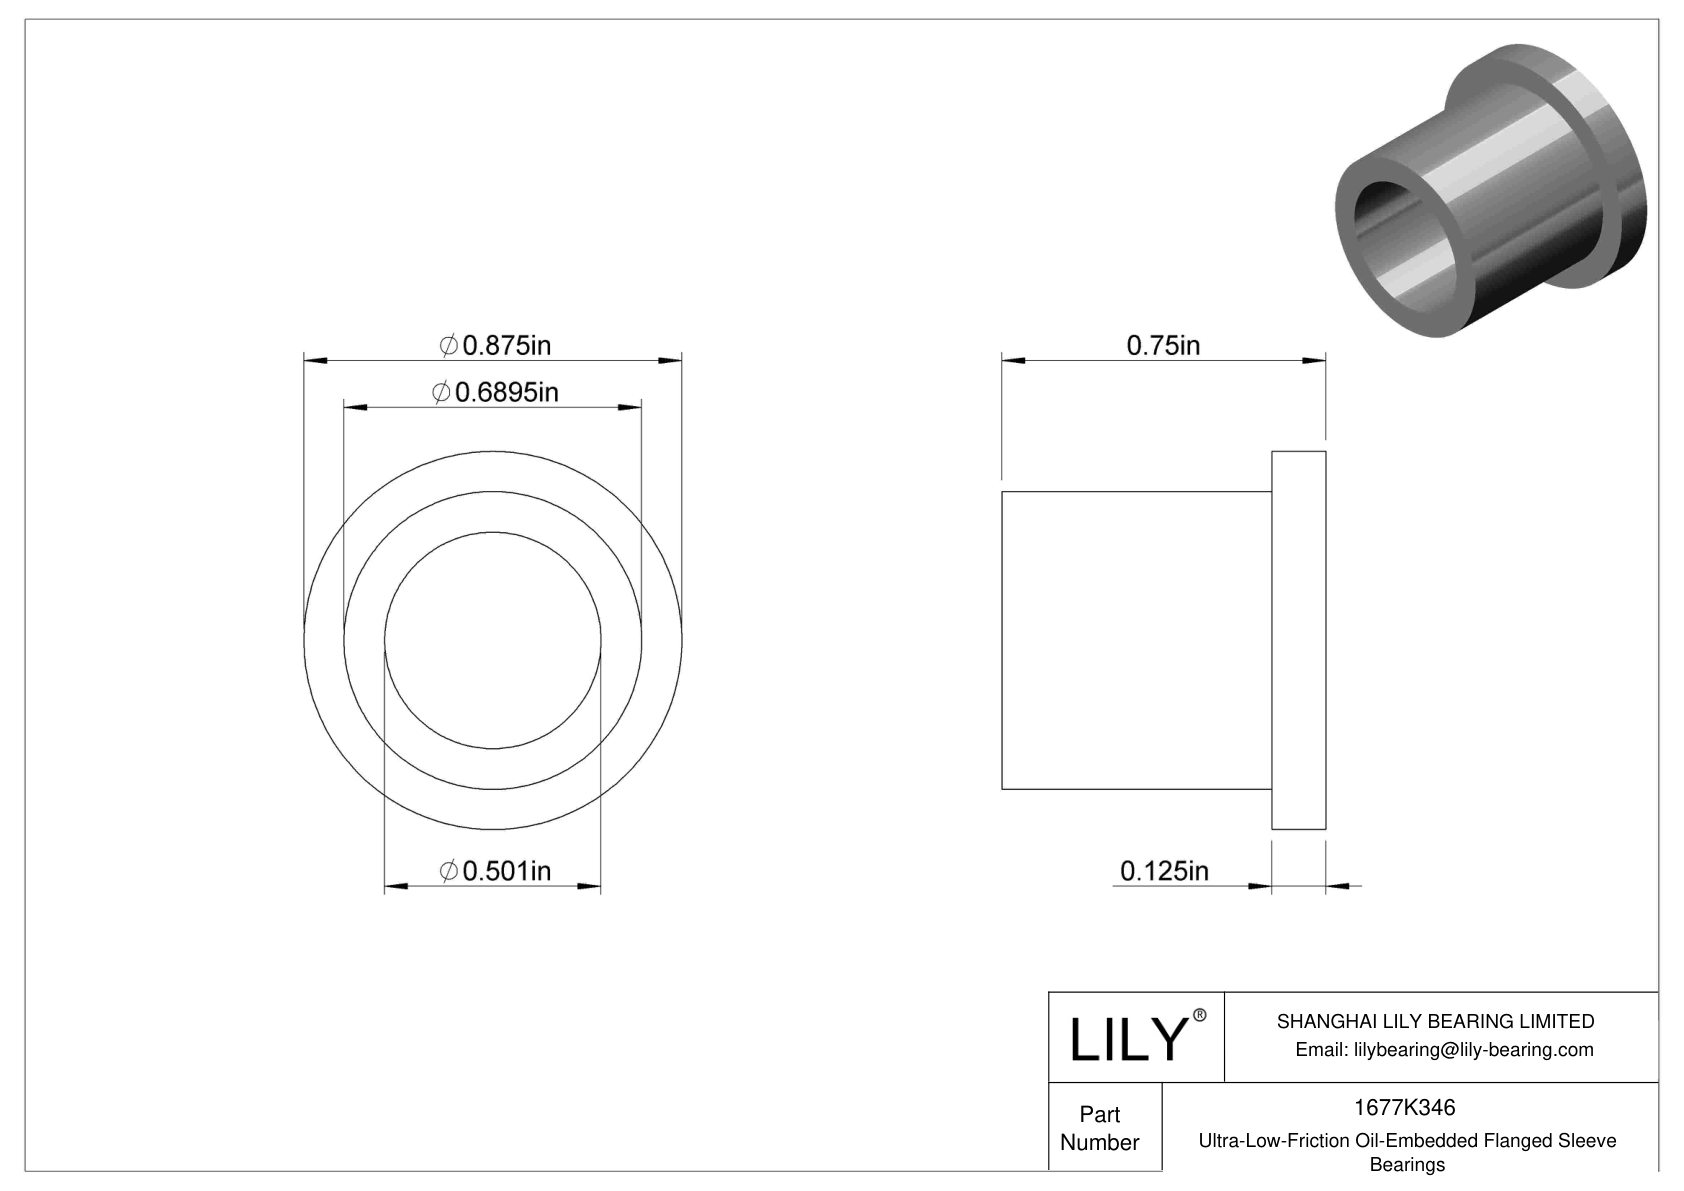 BGHHKDEG Ultra-Low-Friction Oil-Embedded Flanged Sleeve Bearings cad drawing